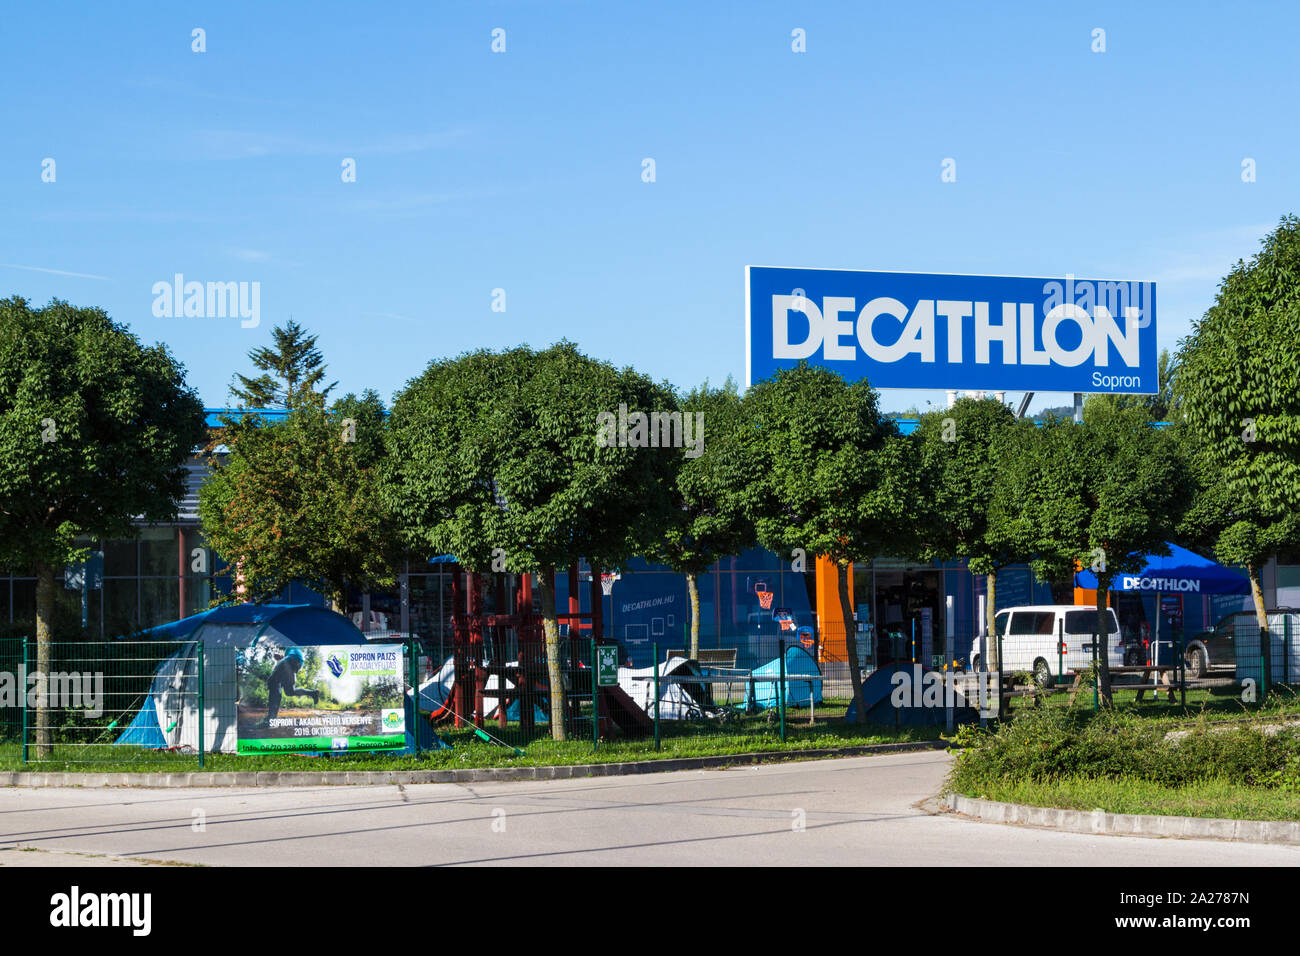 Decathlon sport sports retail store shop sign and tents for testing in  Sopron, Hungary Stock Photo - Alamy